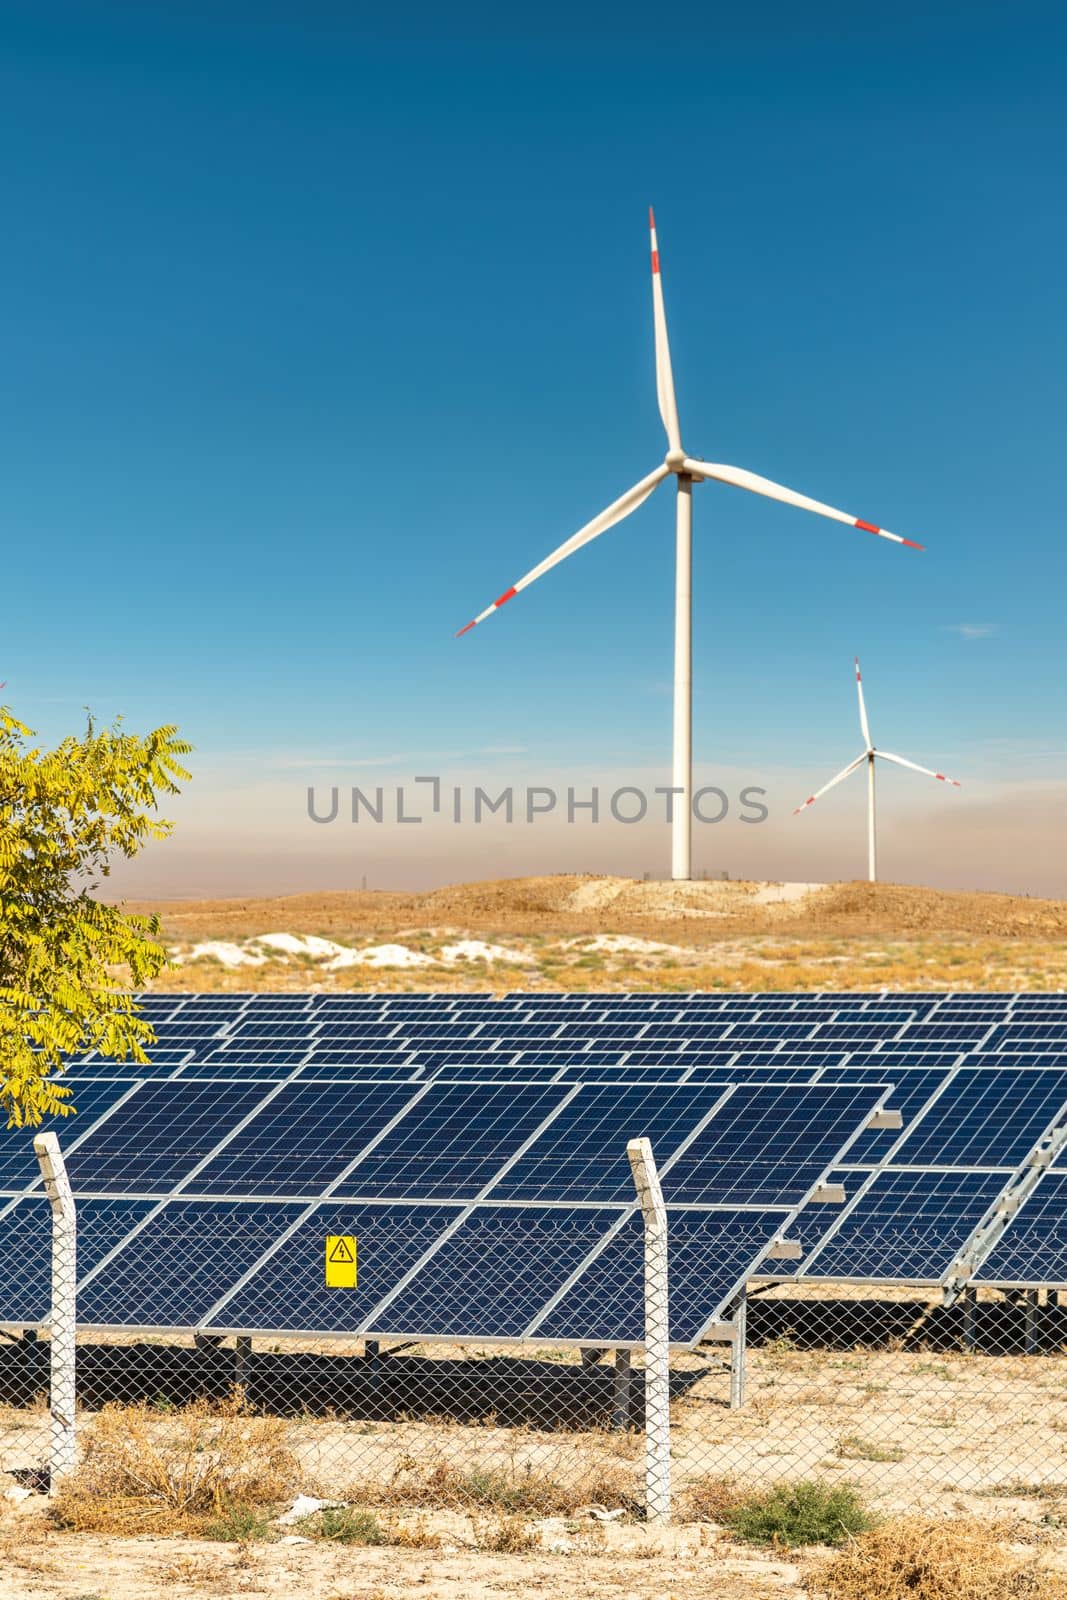 Solar photovoltaic panels and wind turbines. Green energy environmental concept by Sonat